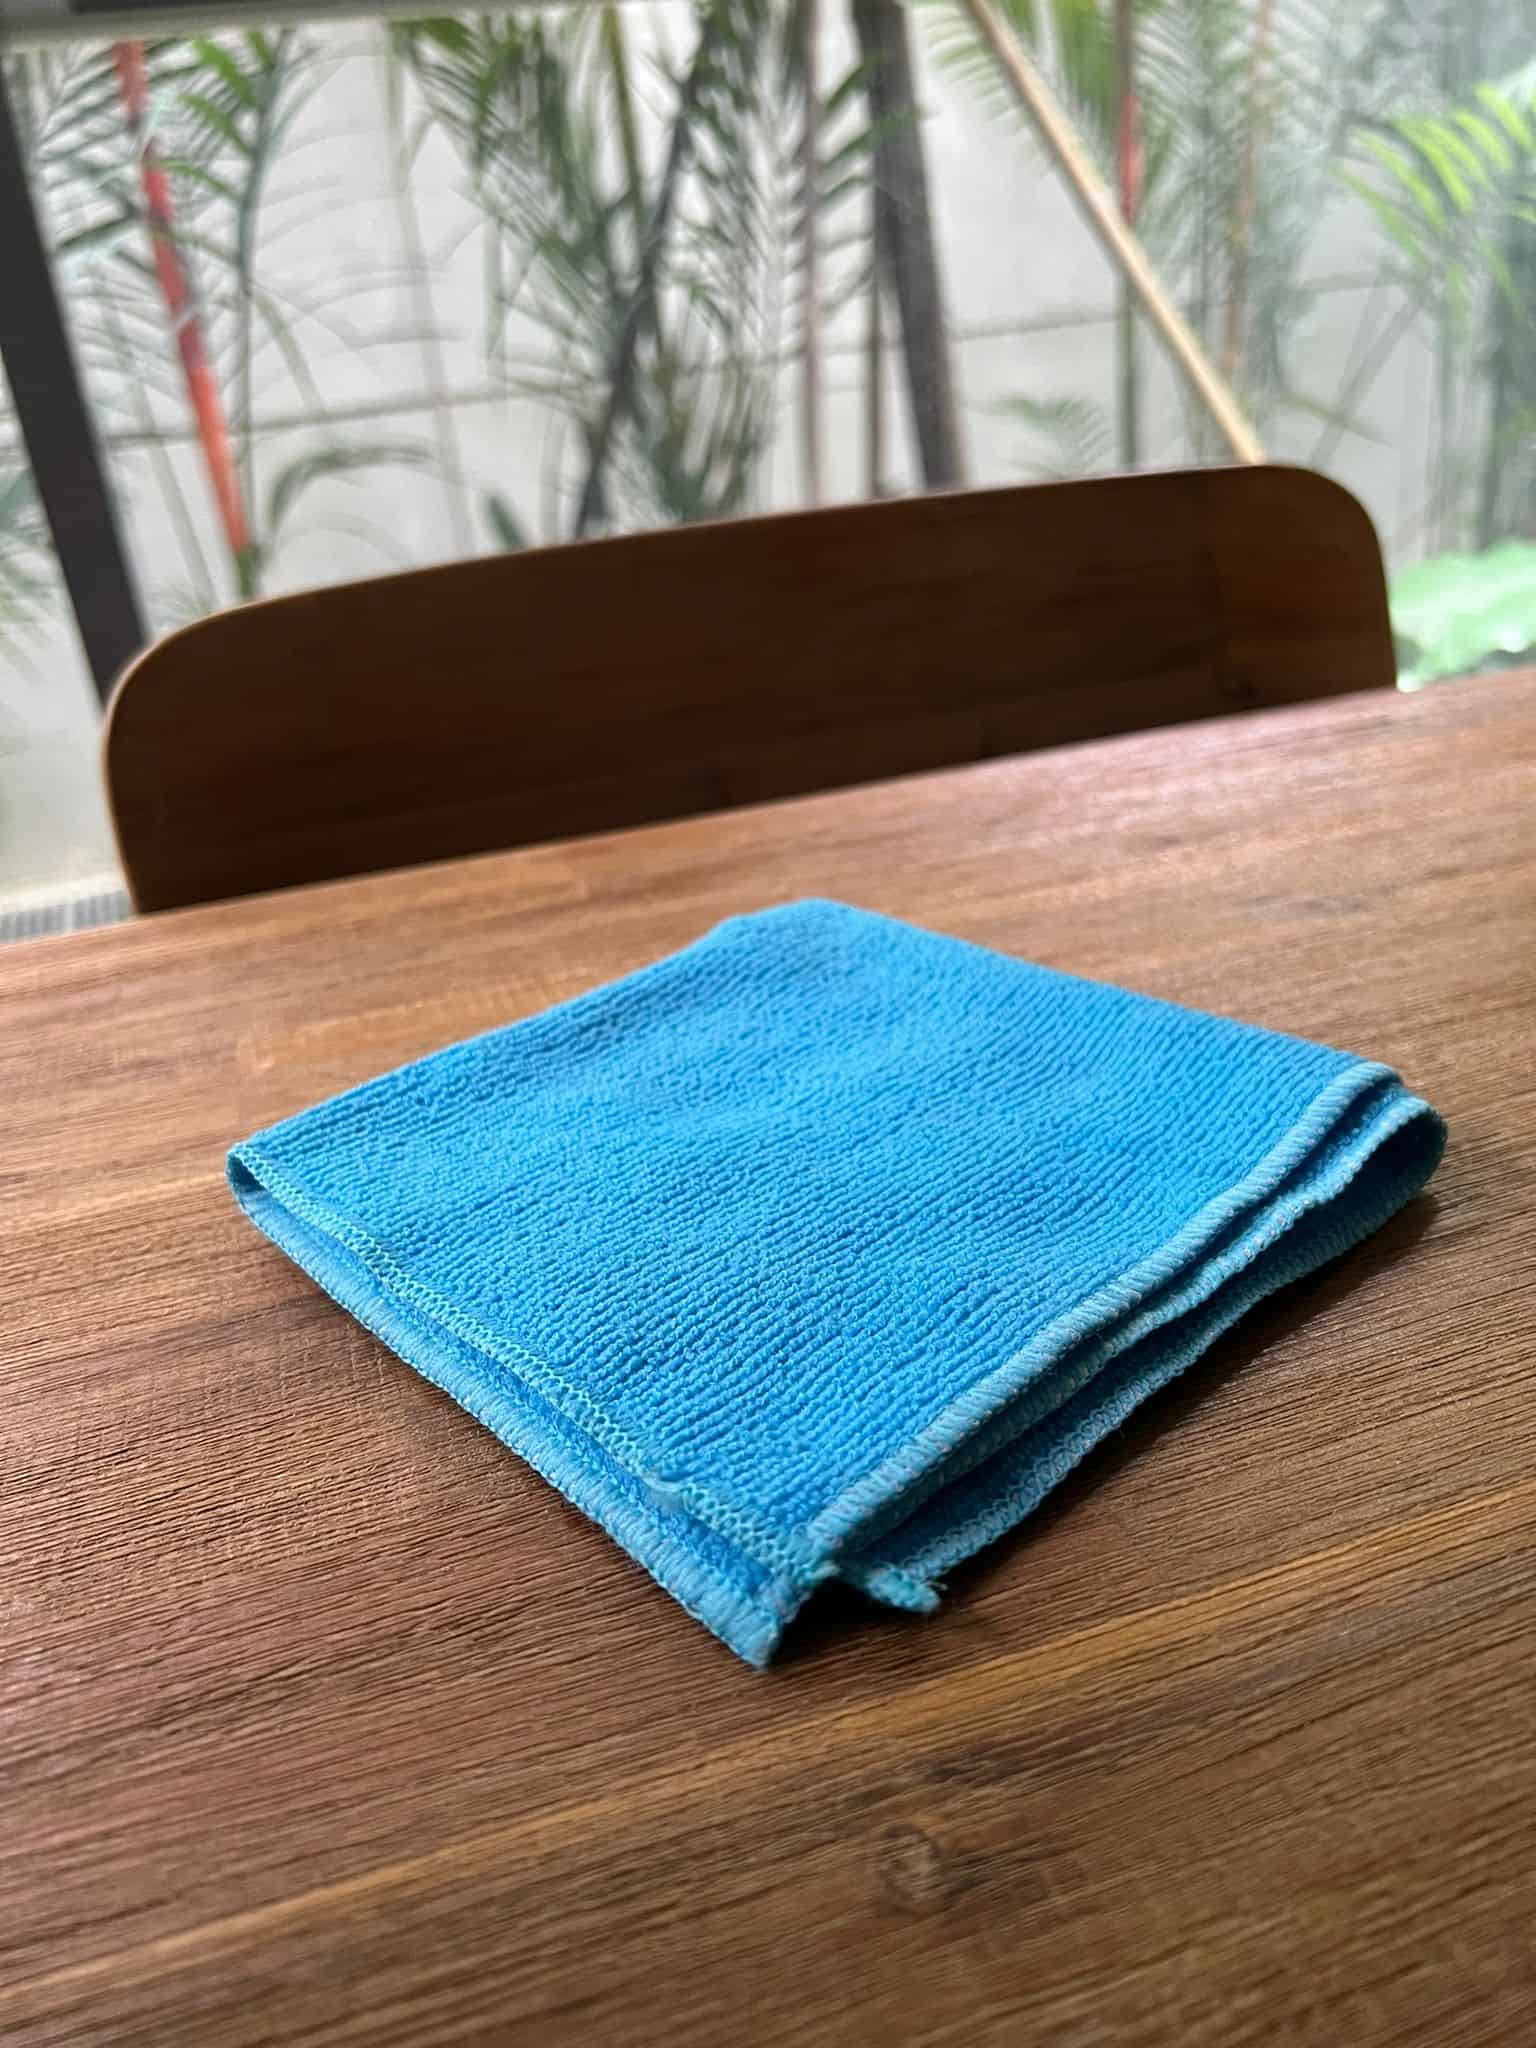 Benefits of Microfiber Cleaning Cloths